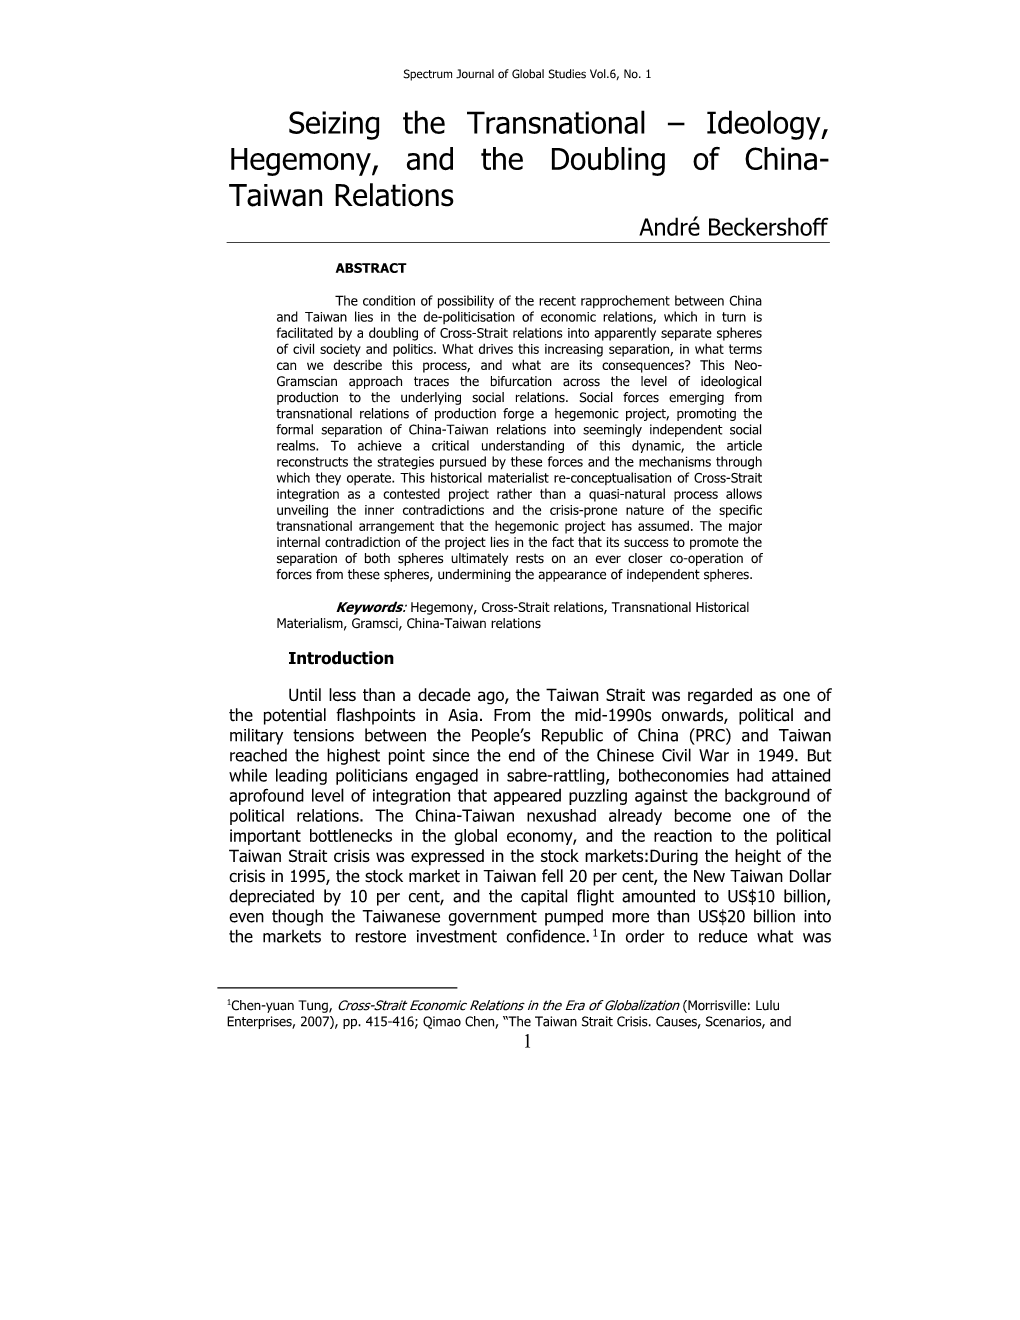 Seizing the Transnational – Ideology, Hegemony, and the Doubling of China- Taiwan Relations André Beckershoff